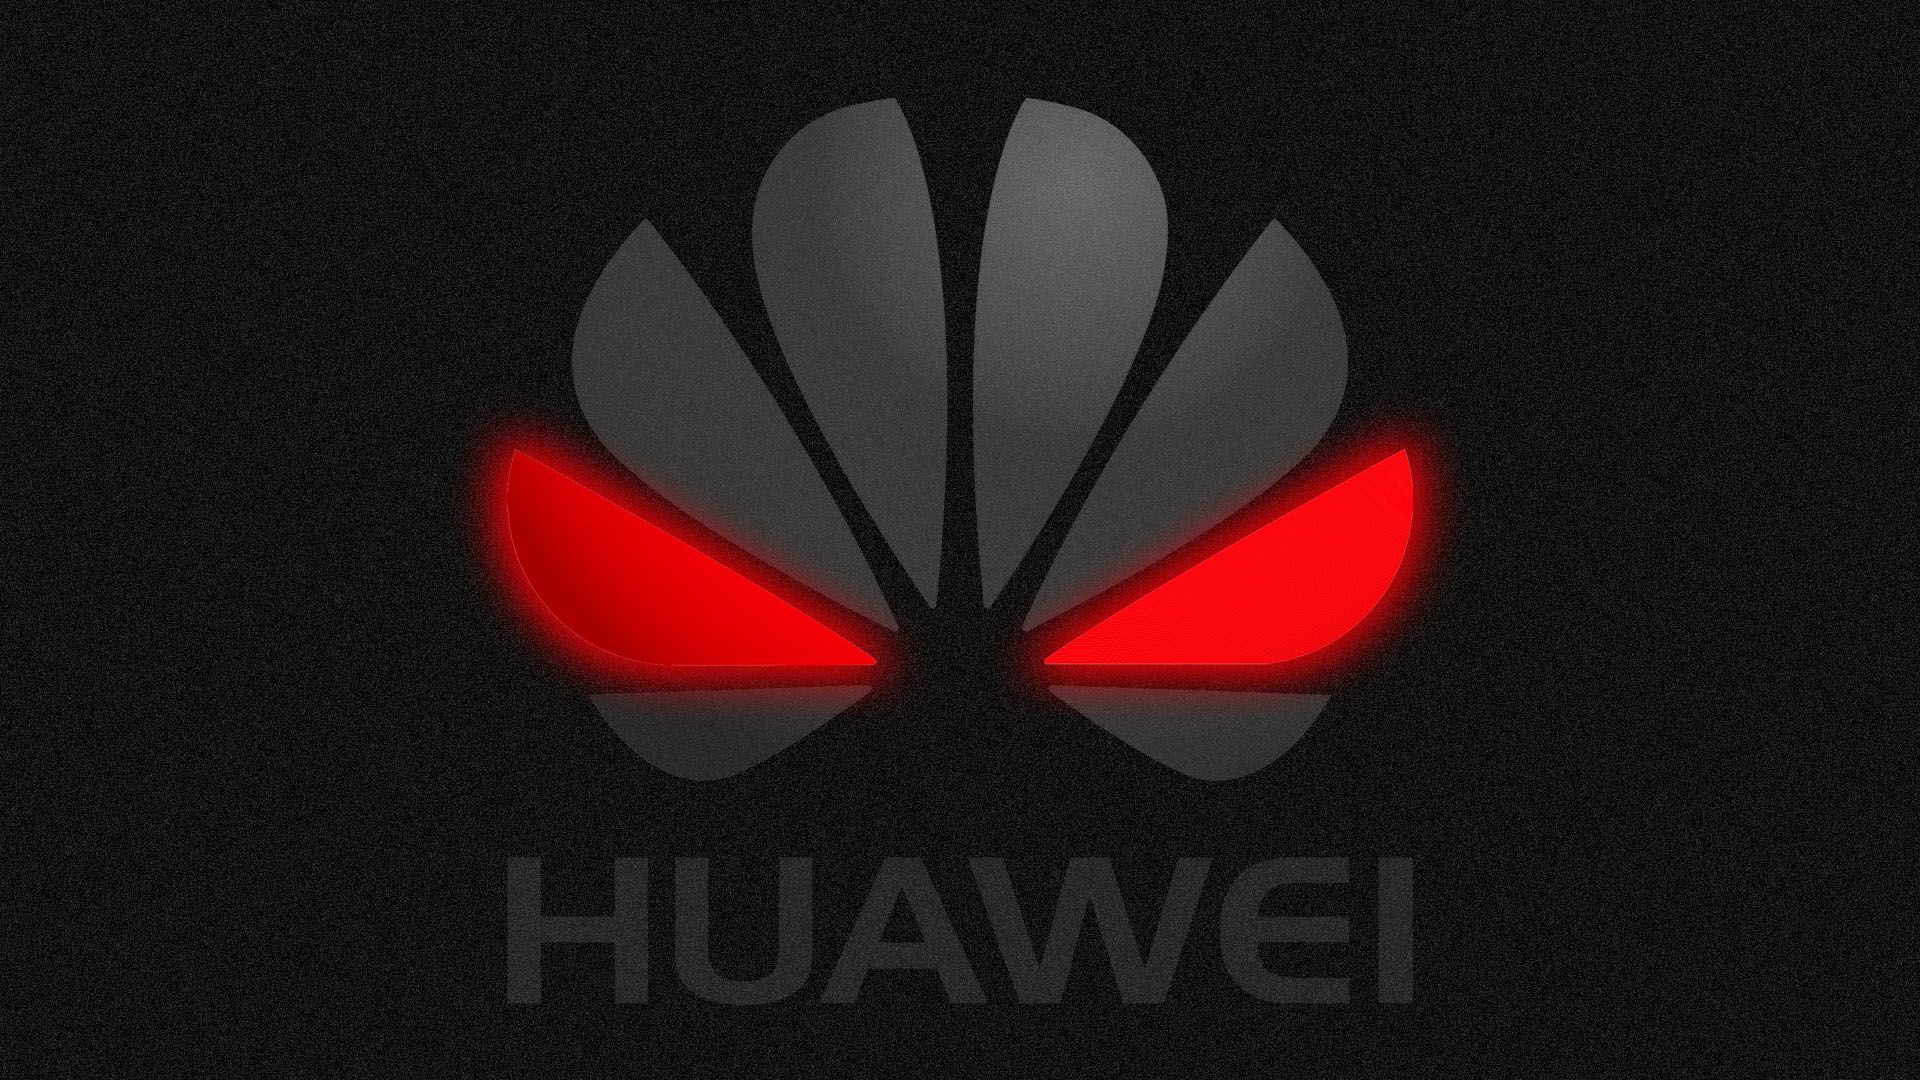 Illustration of Huawei logo with red glowing eyes